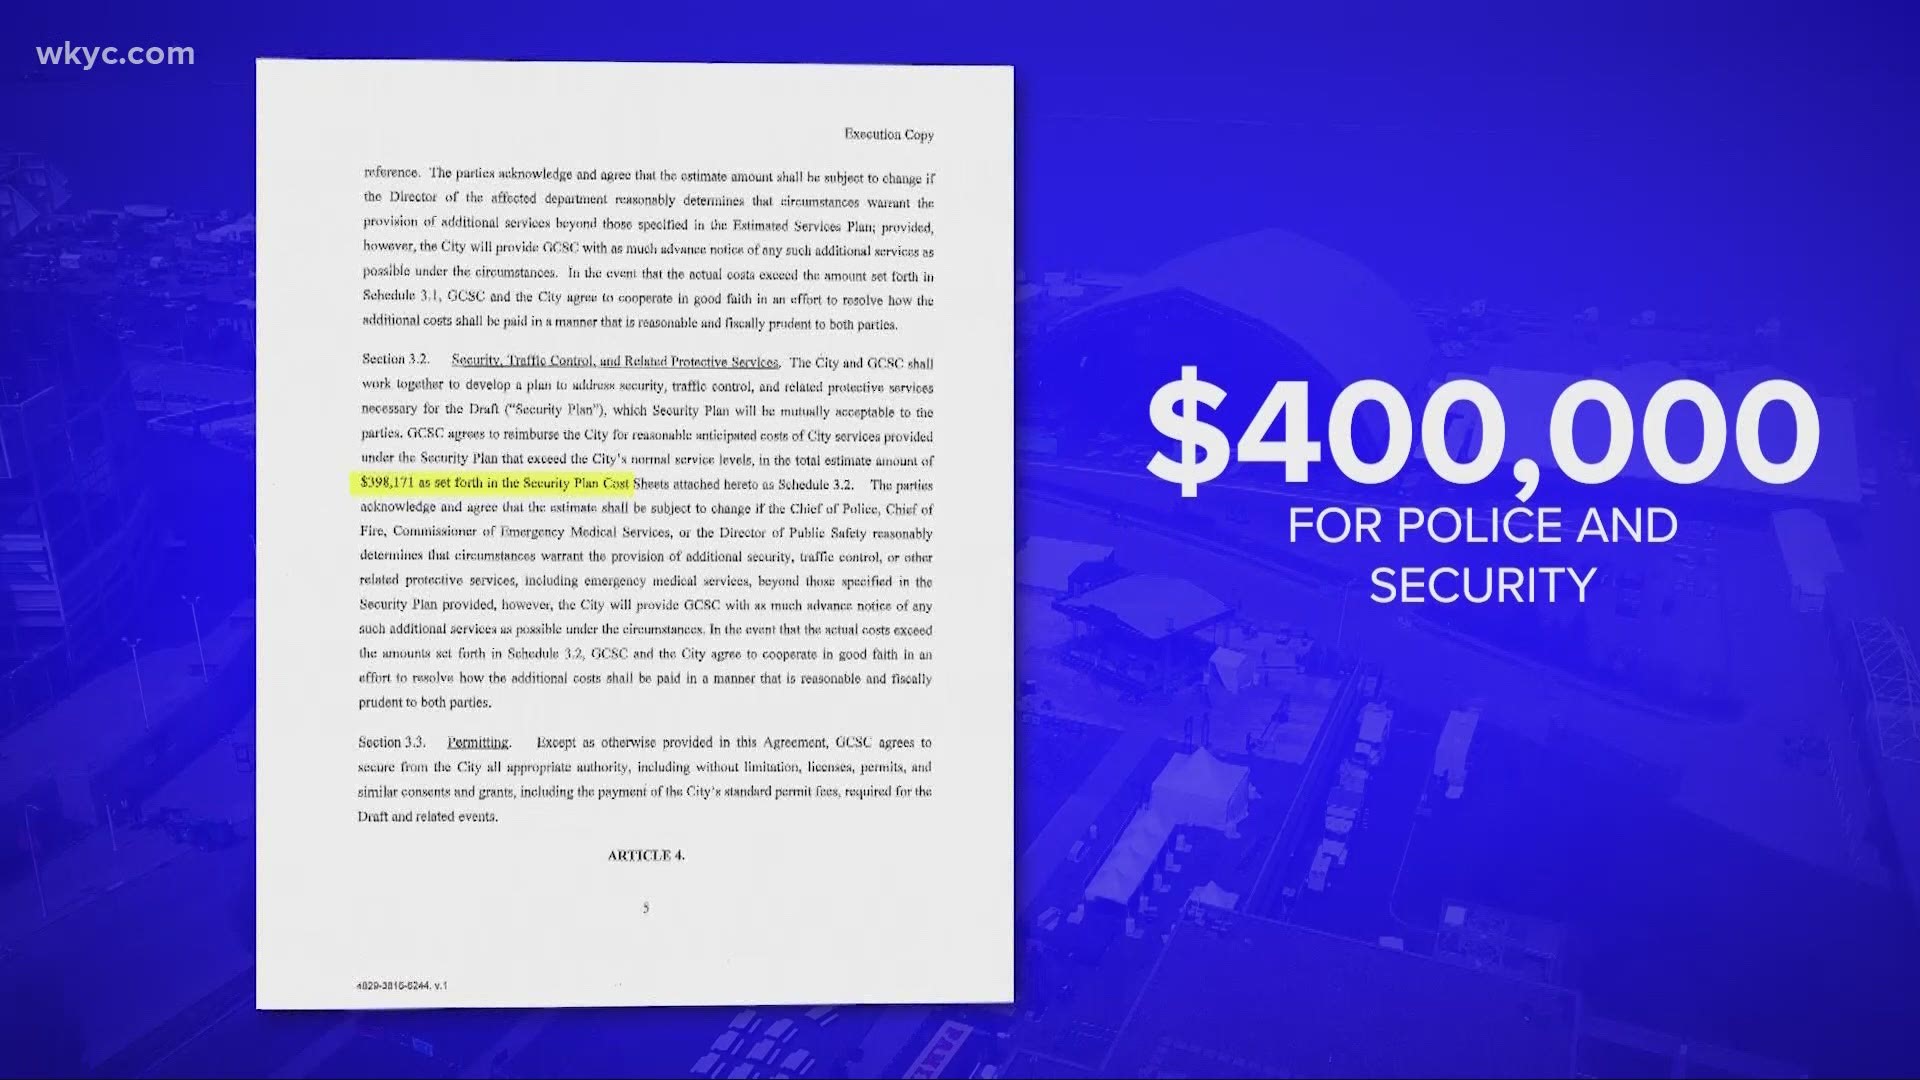 The city is seeking nearly $400,000 for police and tens of thousands more for other services, according to a contract with the Greater Cleveland Sports Commission.